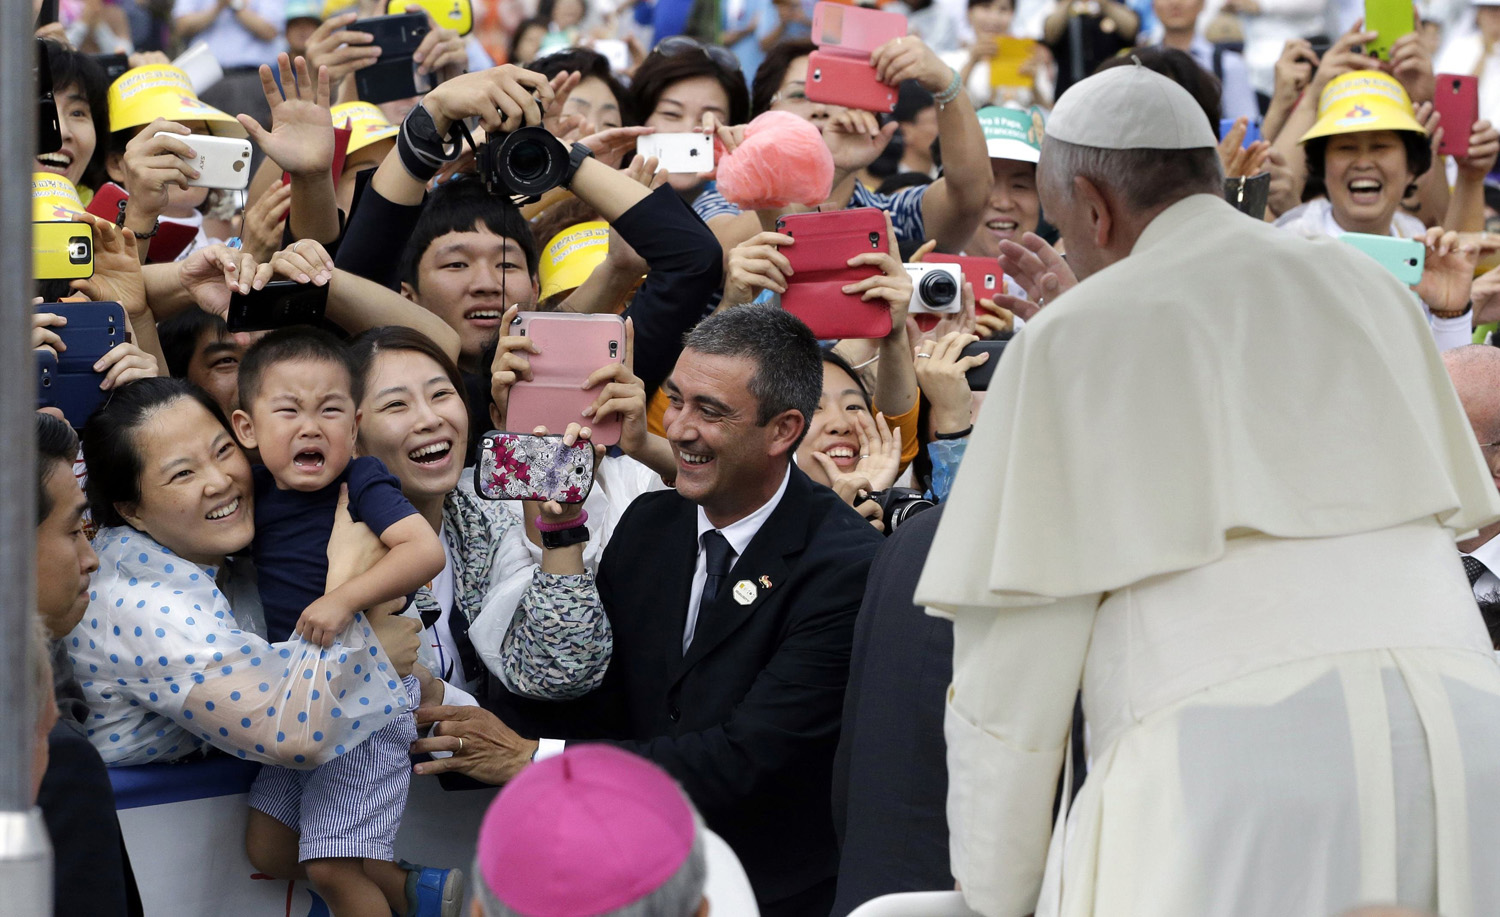 Pope Francis blesses a crying child who does not want to be separated from his mother to be blessed by the pope, as a Vatican gendarmerie (C) smiles, at the pope's arrival for a closing Holy Mass of the 6th Asian Youth Day at Haemi Castle in Haemi, Seoul on Aug. 17, 2014.